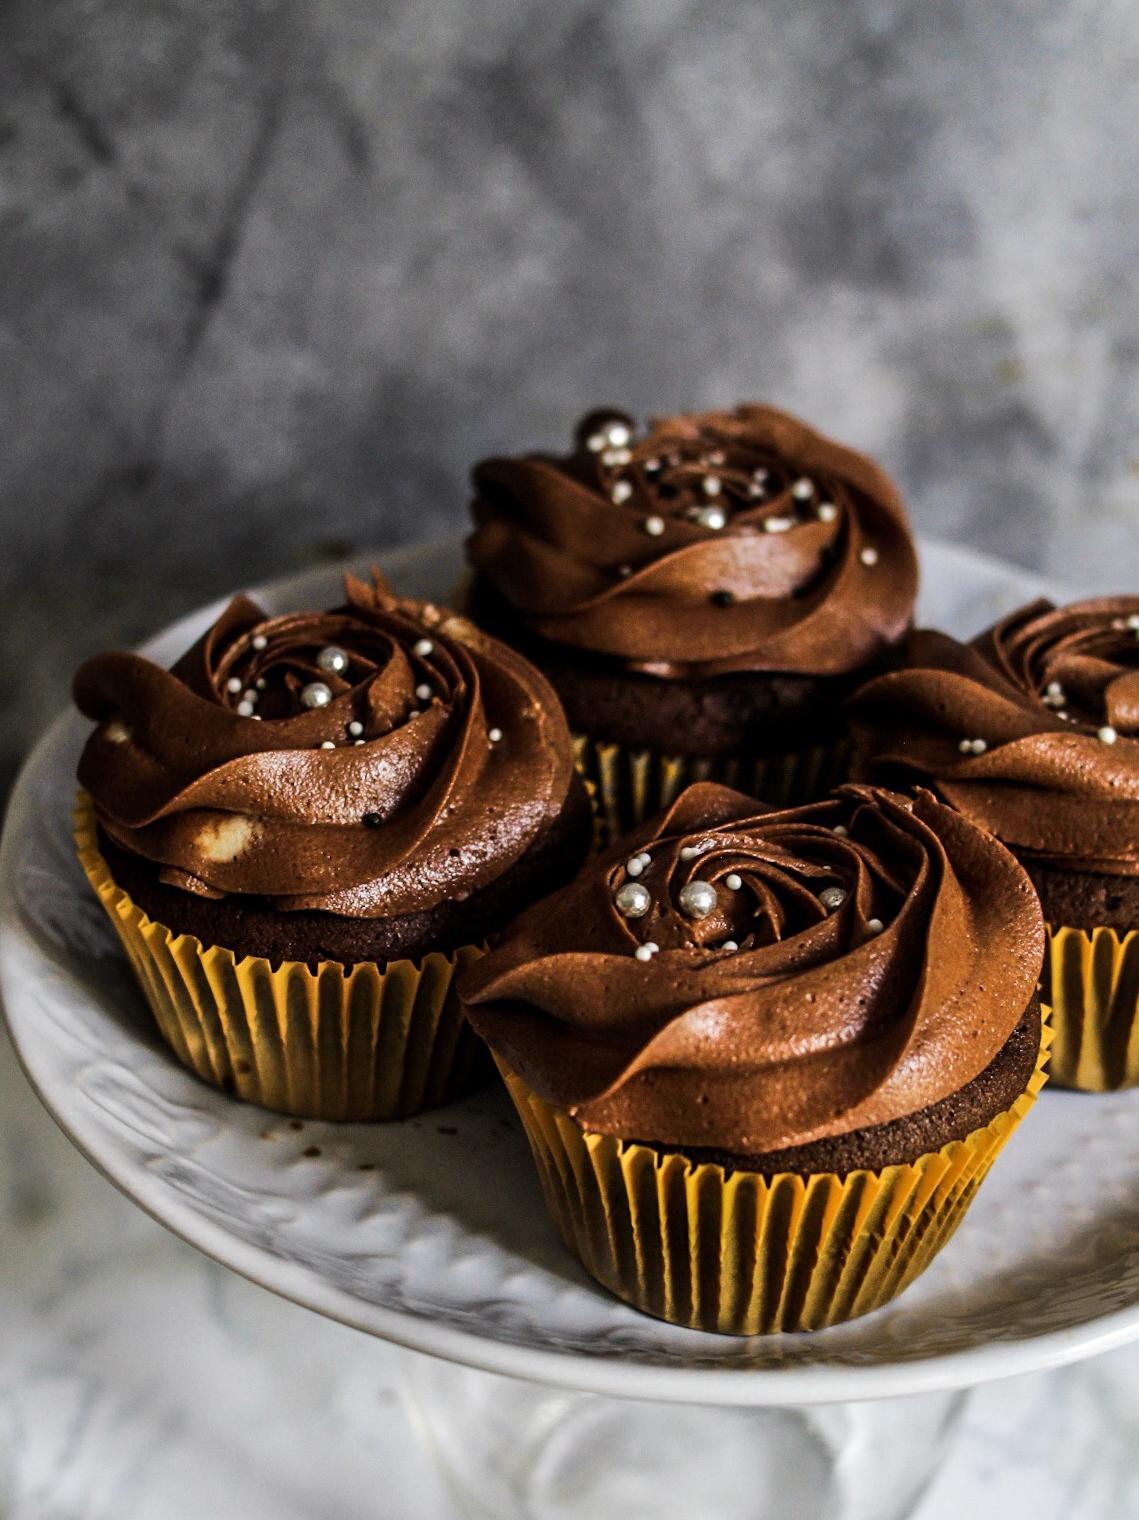  These cupcakes pack a double punch of caffeine and tequila! 🍫🍹☕